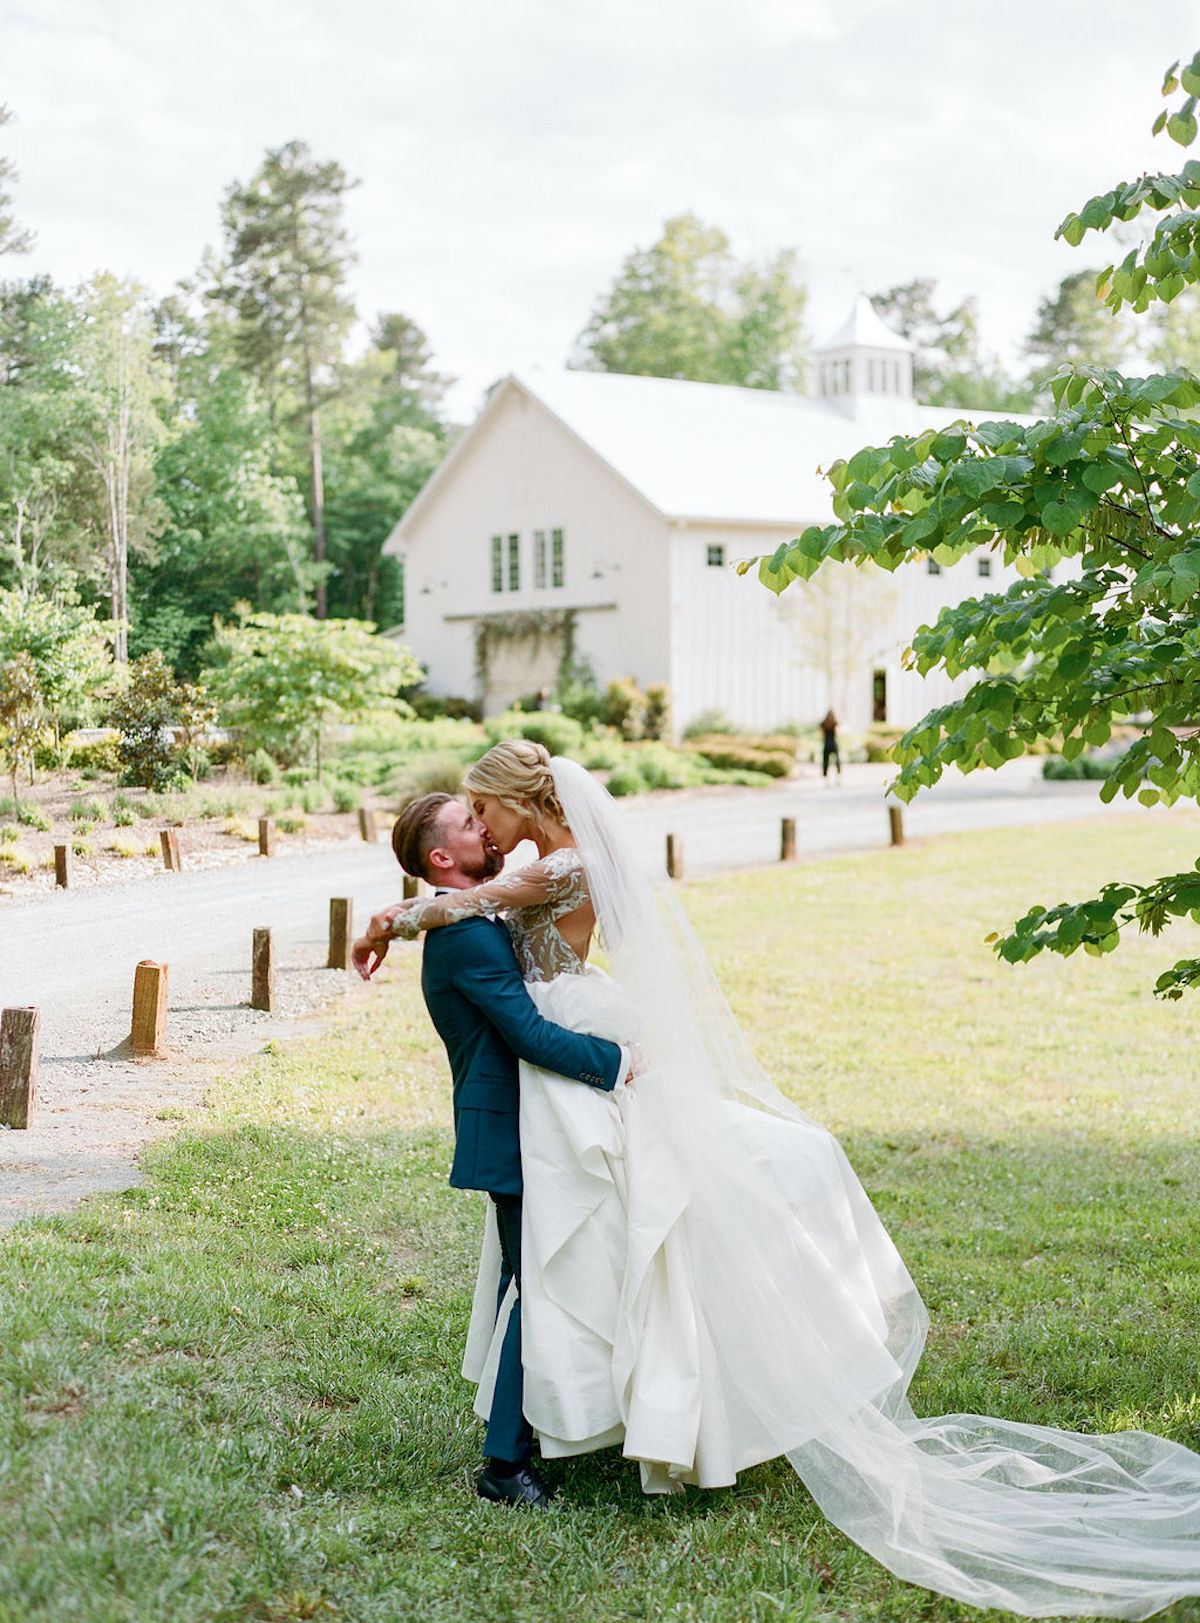 Groom holds bride in air while kissing her with barn in background